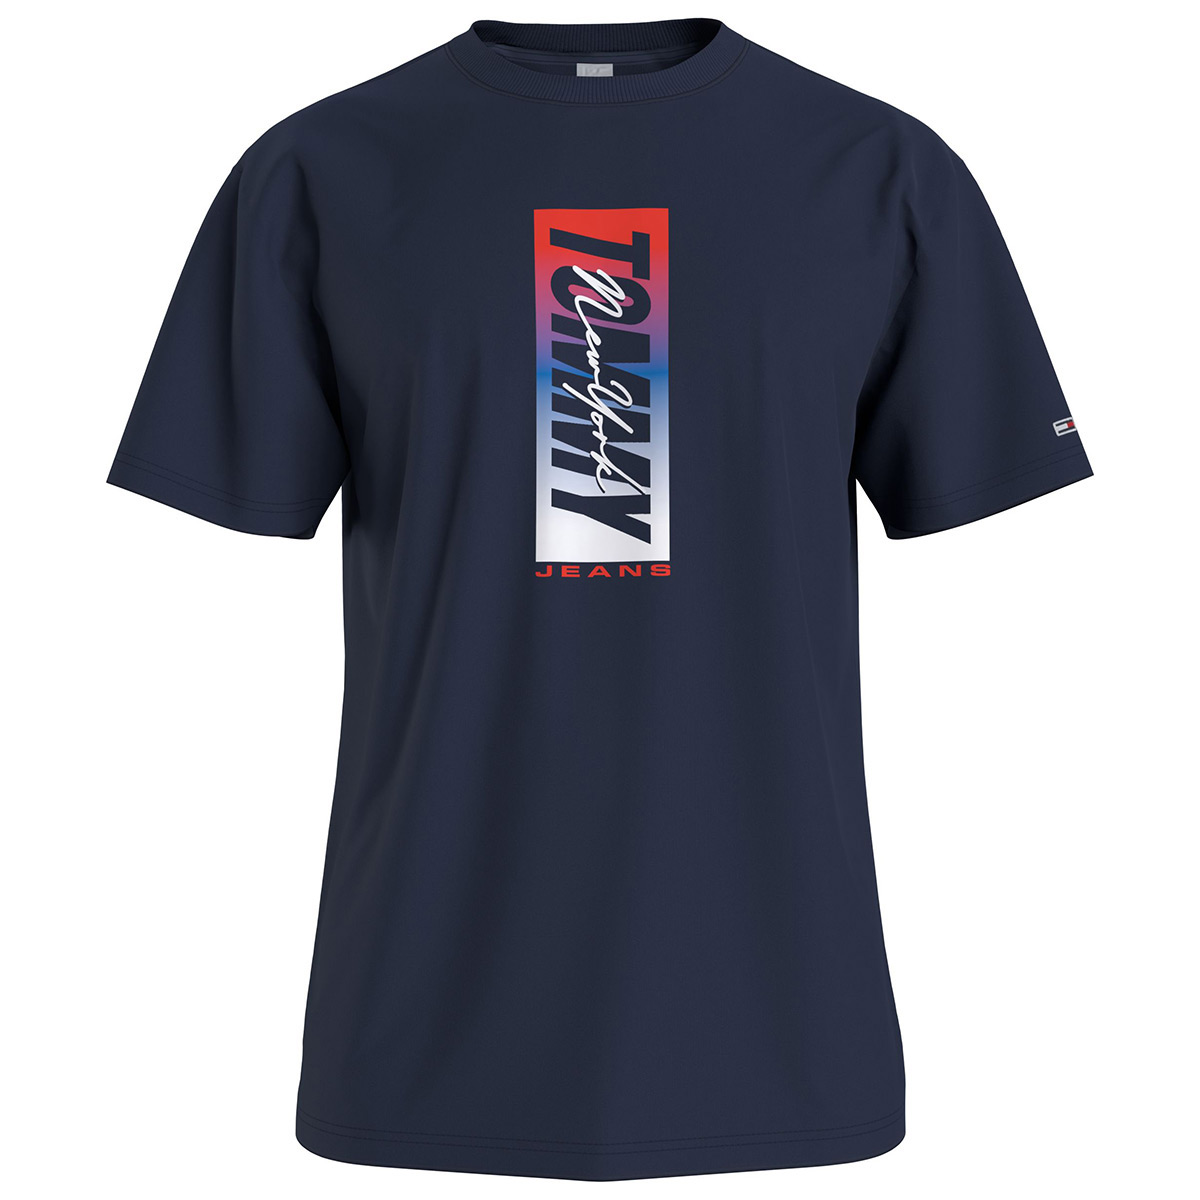 Tommy Hilfiger "Vertical Front Tee"